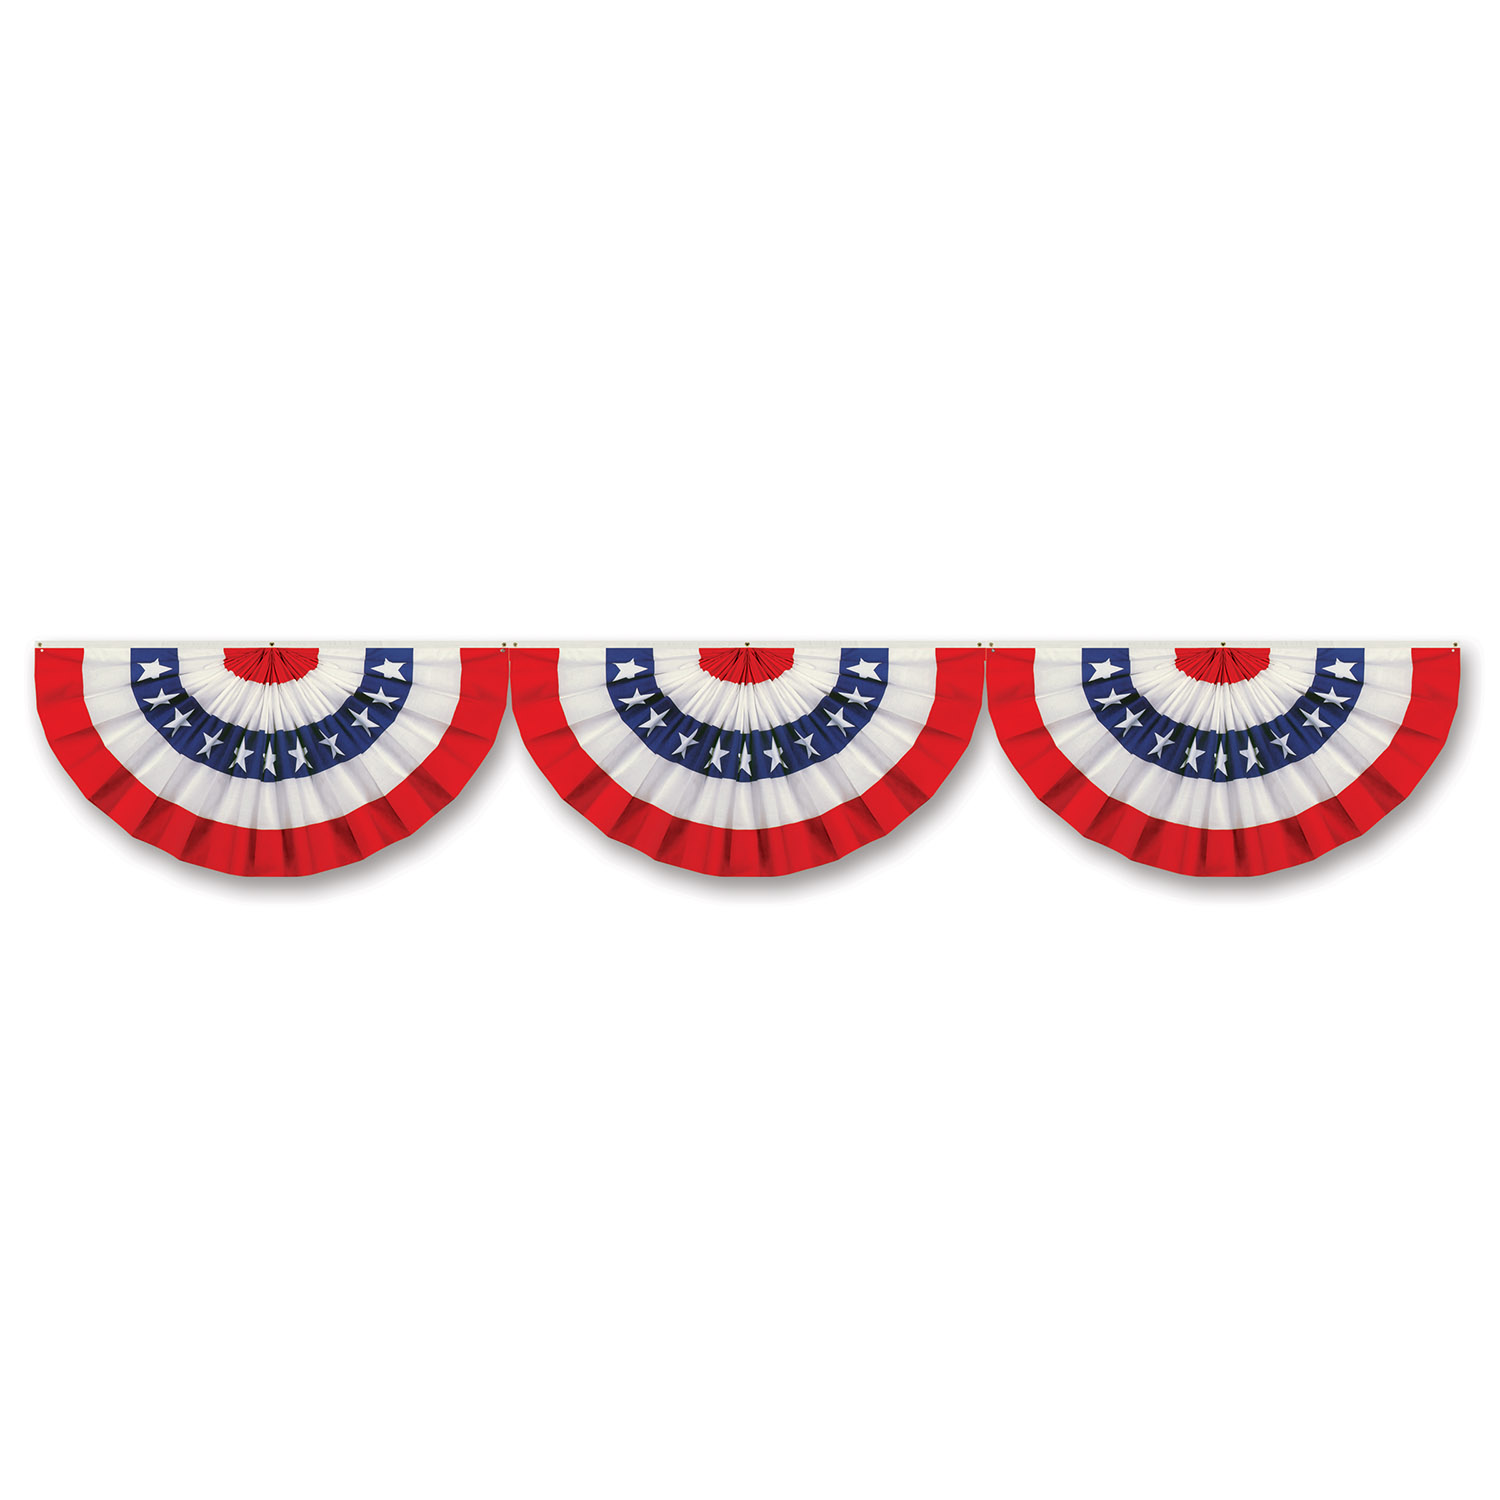 12 pieces of Jointed Patriotic Bunting Cutout Stars & Stripes Design; Prtd 2 Sides